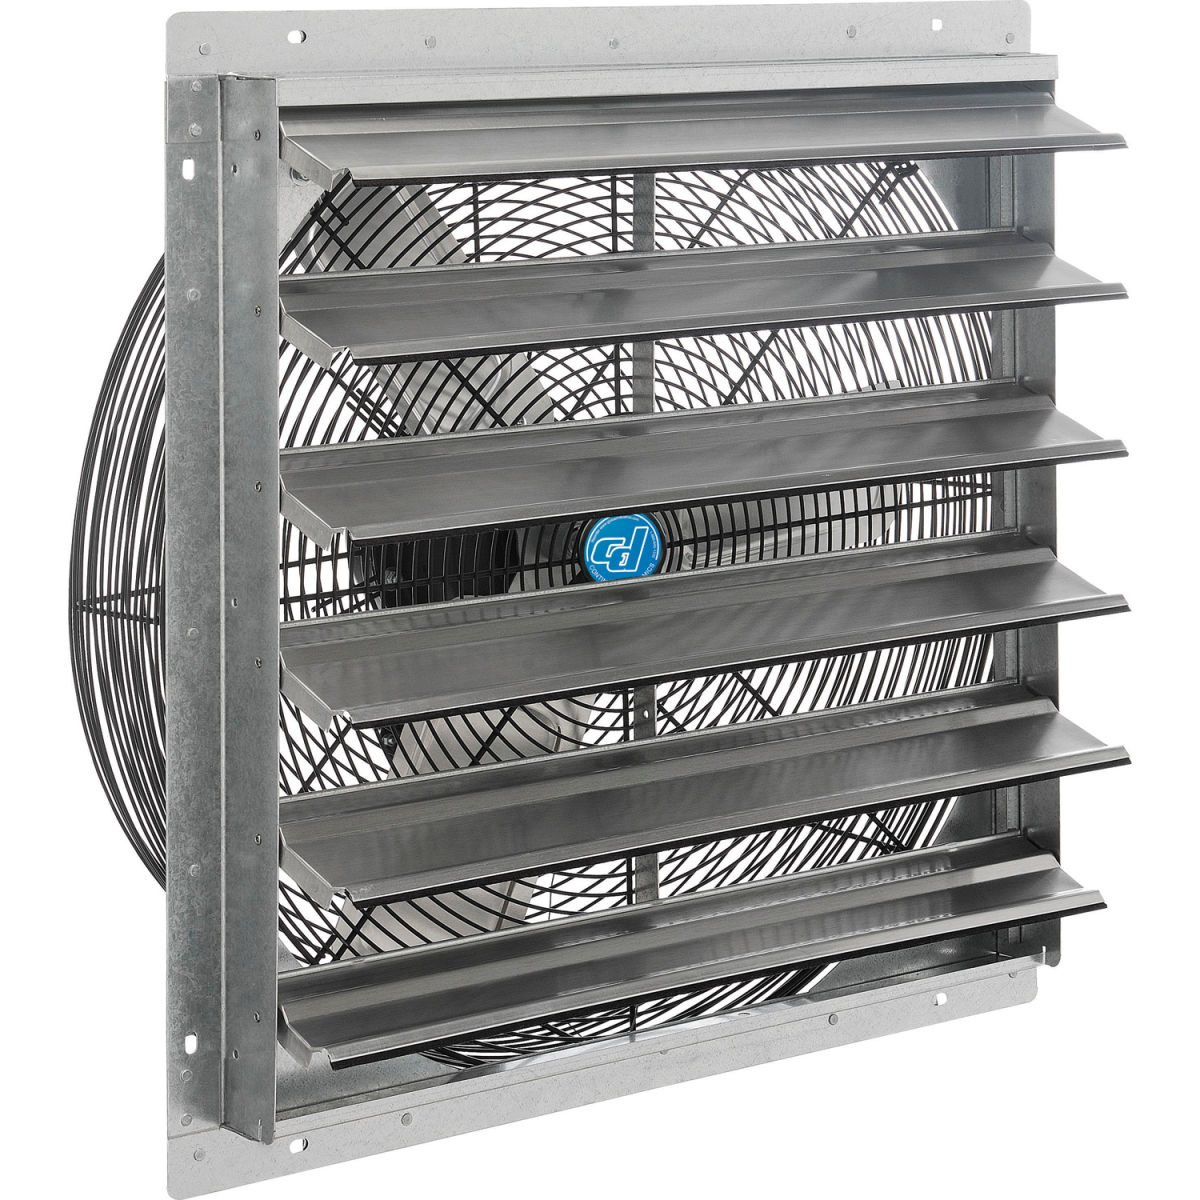 Designed to Furnish 24 in. 0.25 HP Single Speed Exhaust Fan with Shutter & Direct Drive